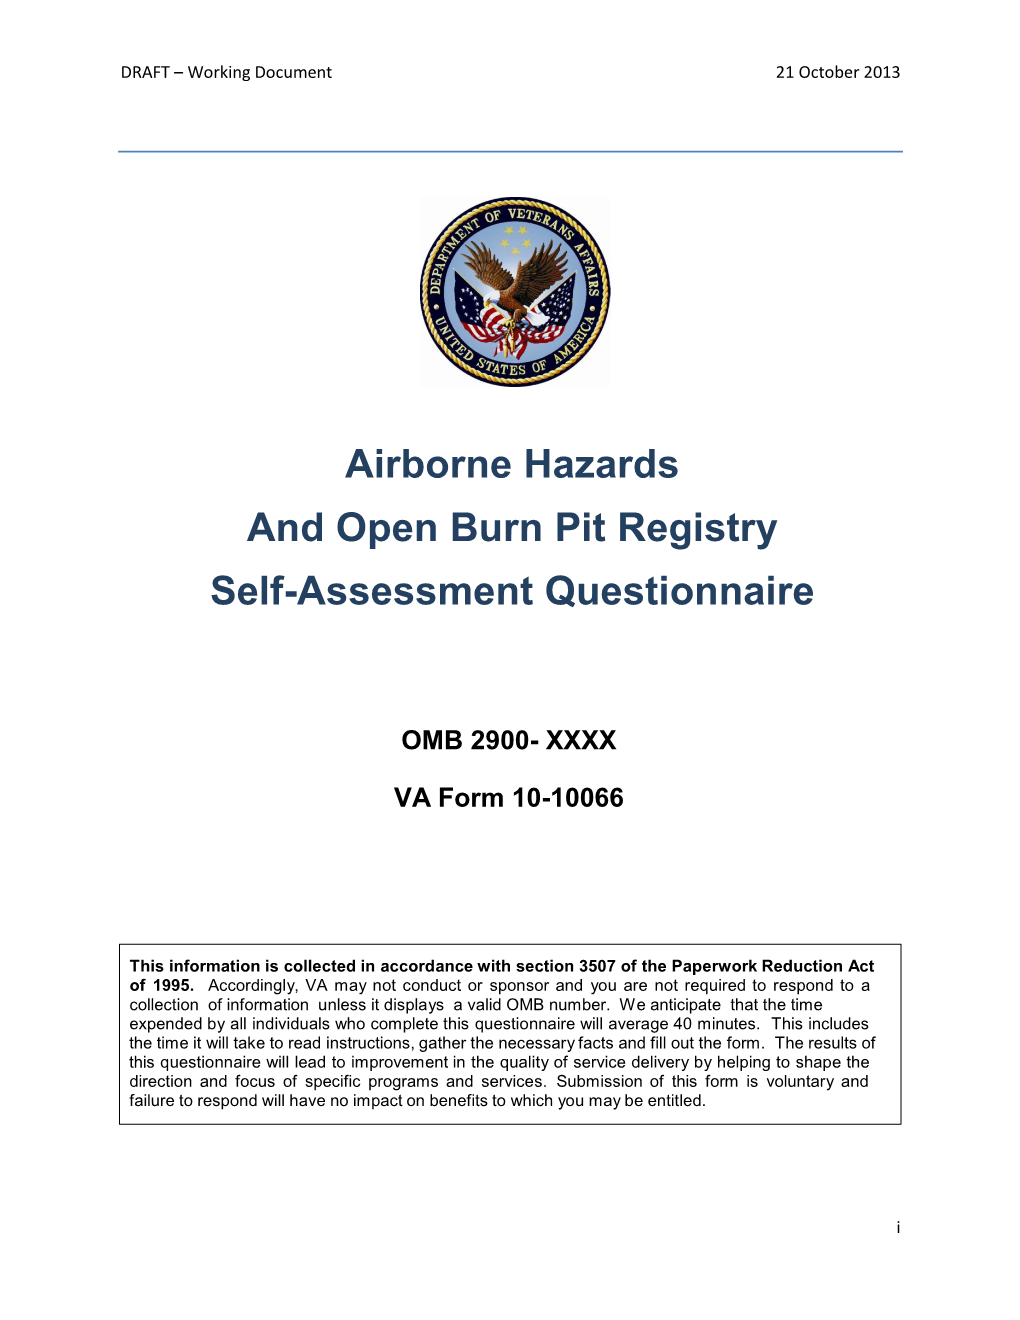 Airborne Hazards and Open Burn Pit Registry Self-Assessment Questionnaire